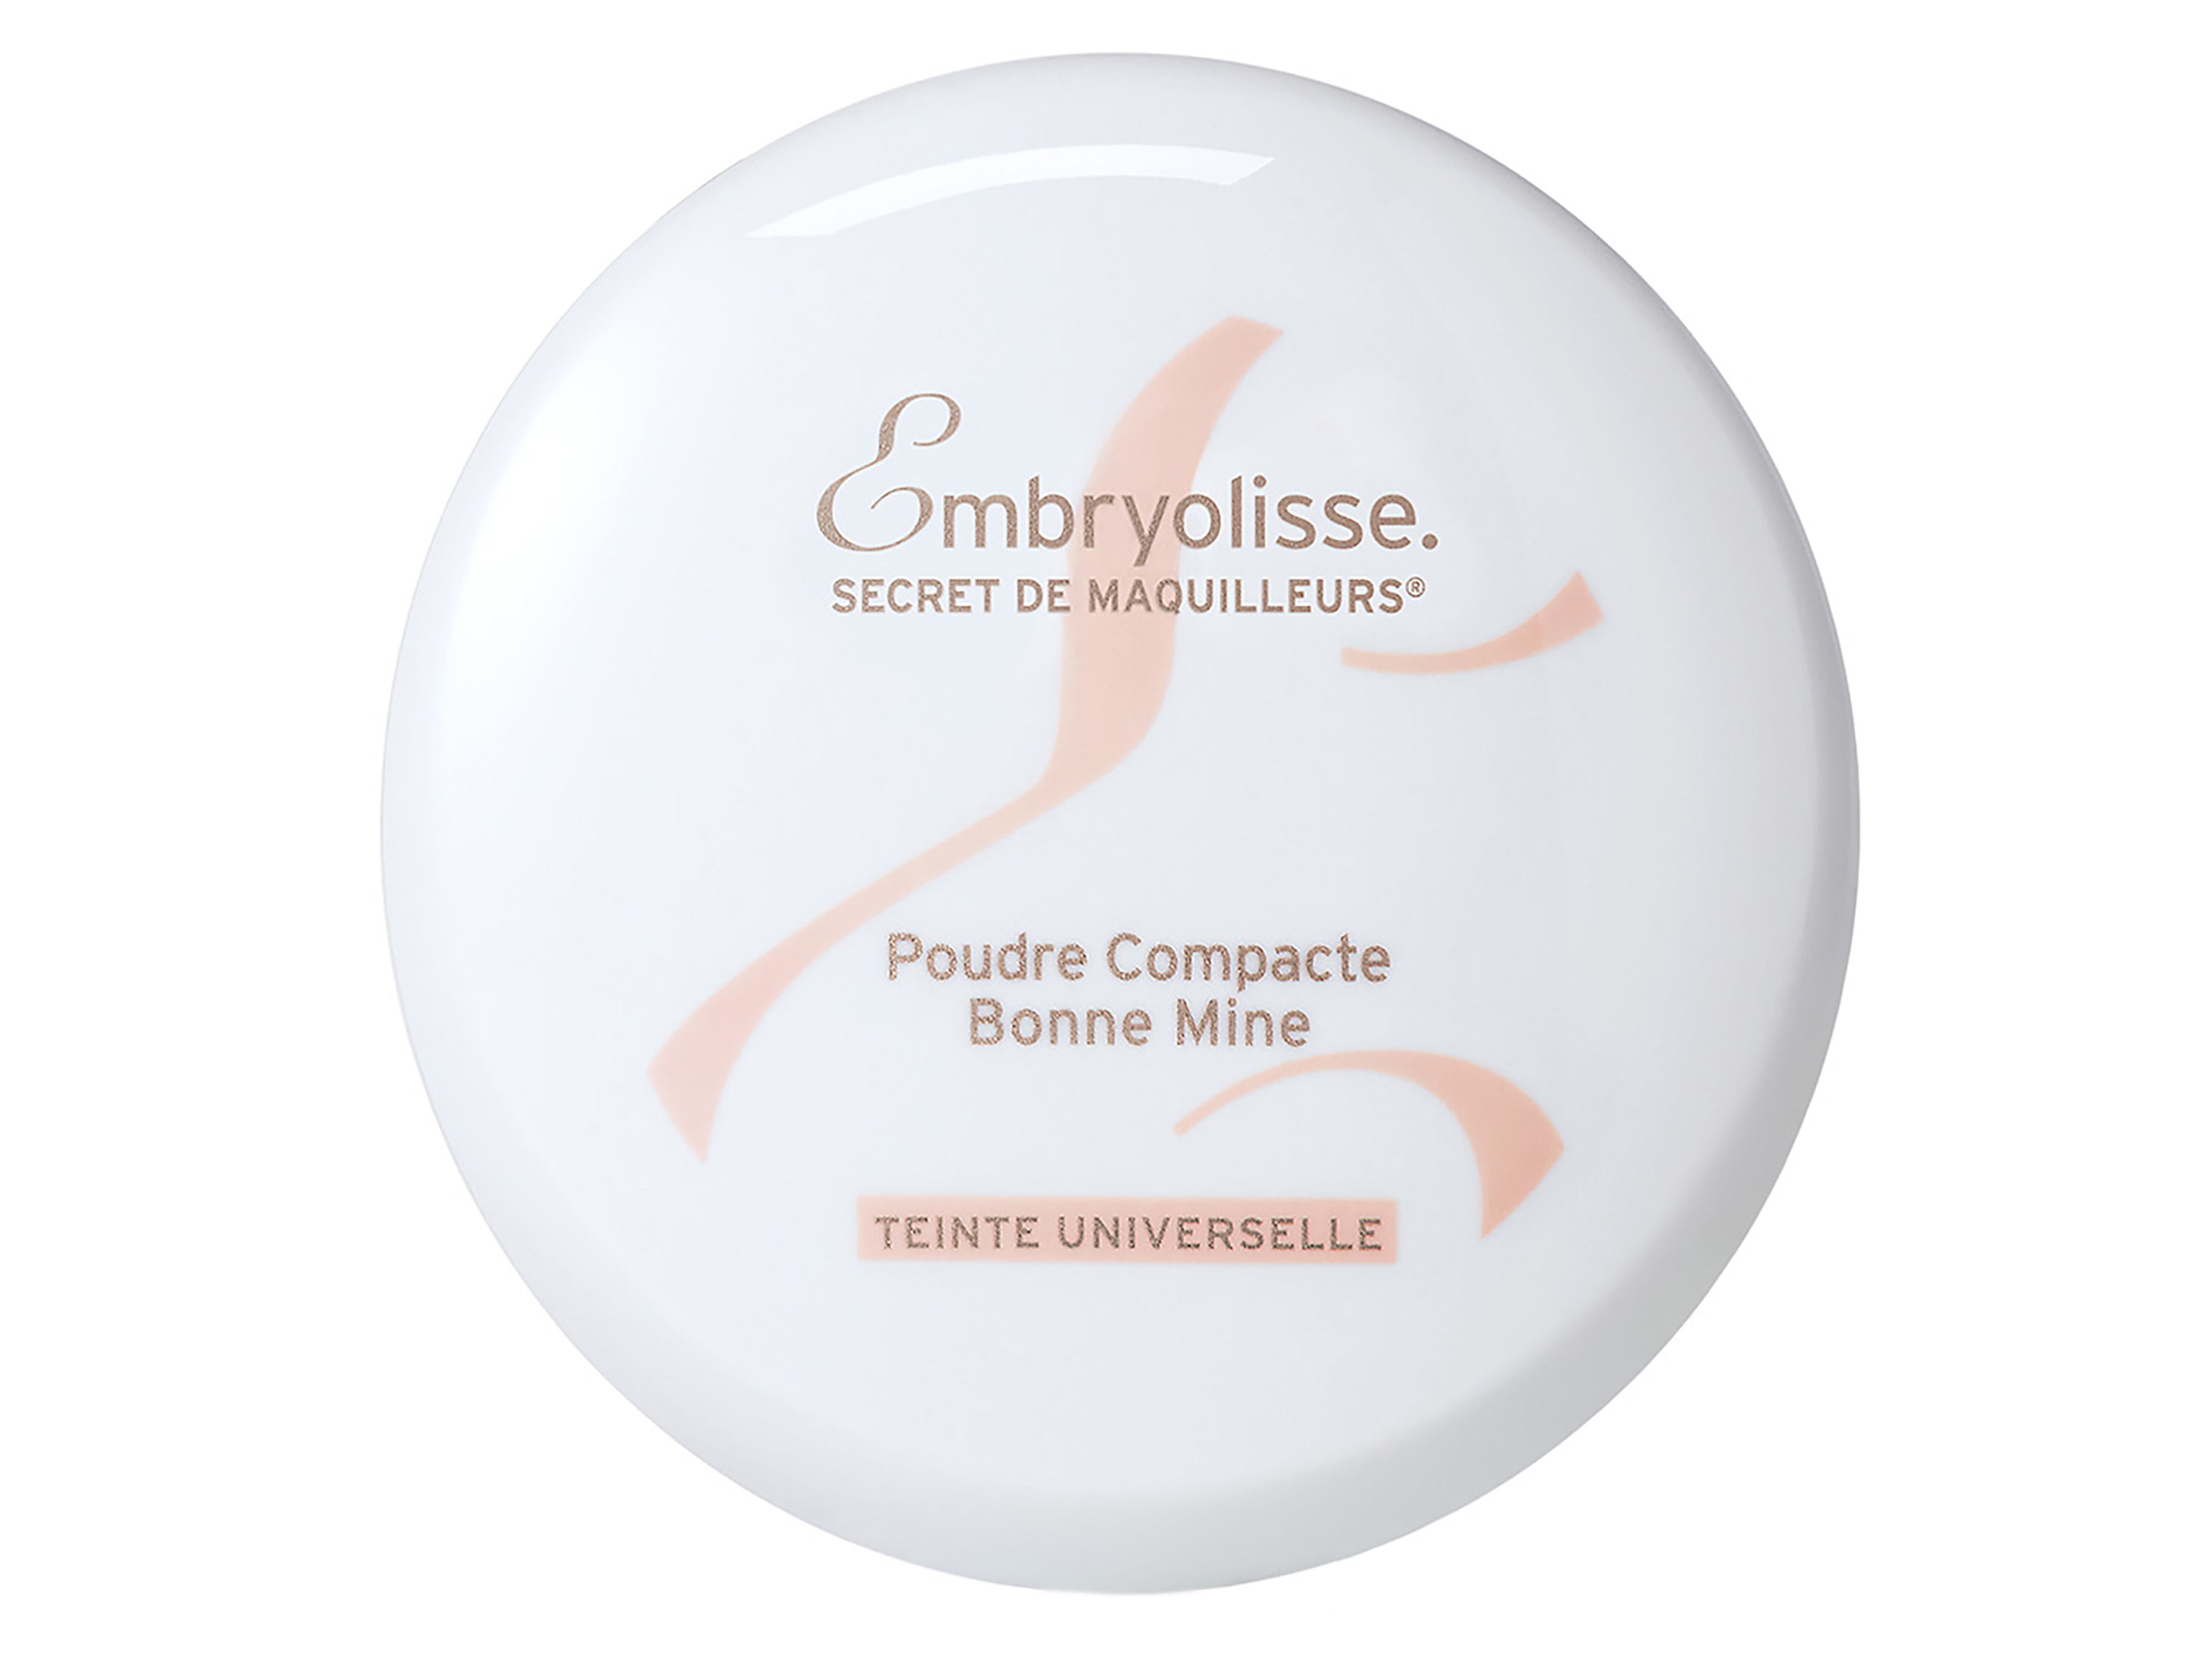 Embryolisse Radiant Complexion Compact Powder, 12 g